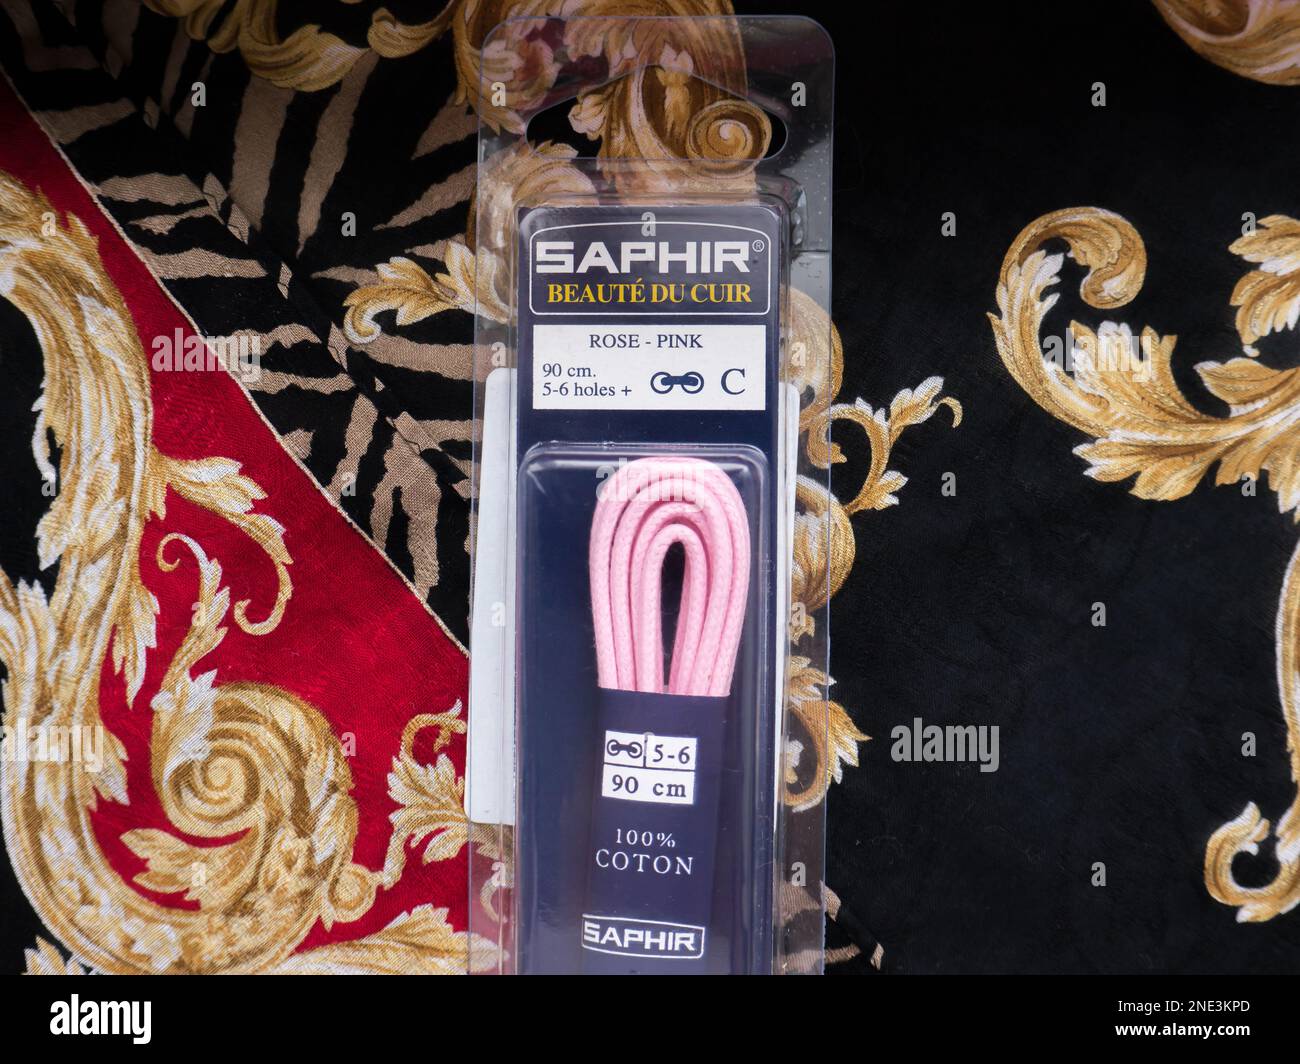 SAPHIR laces. SAPHIR was founded in 1920 and is now France’s foremost brand. Stock Photo